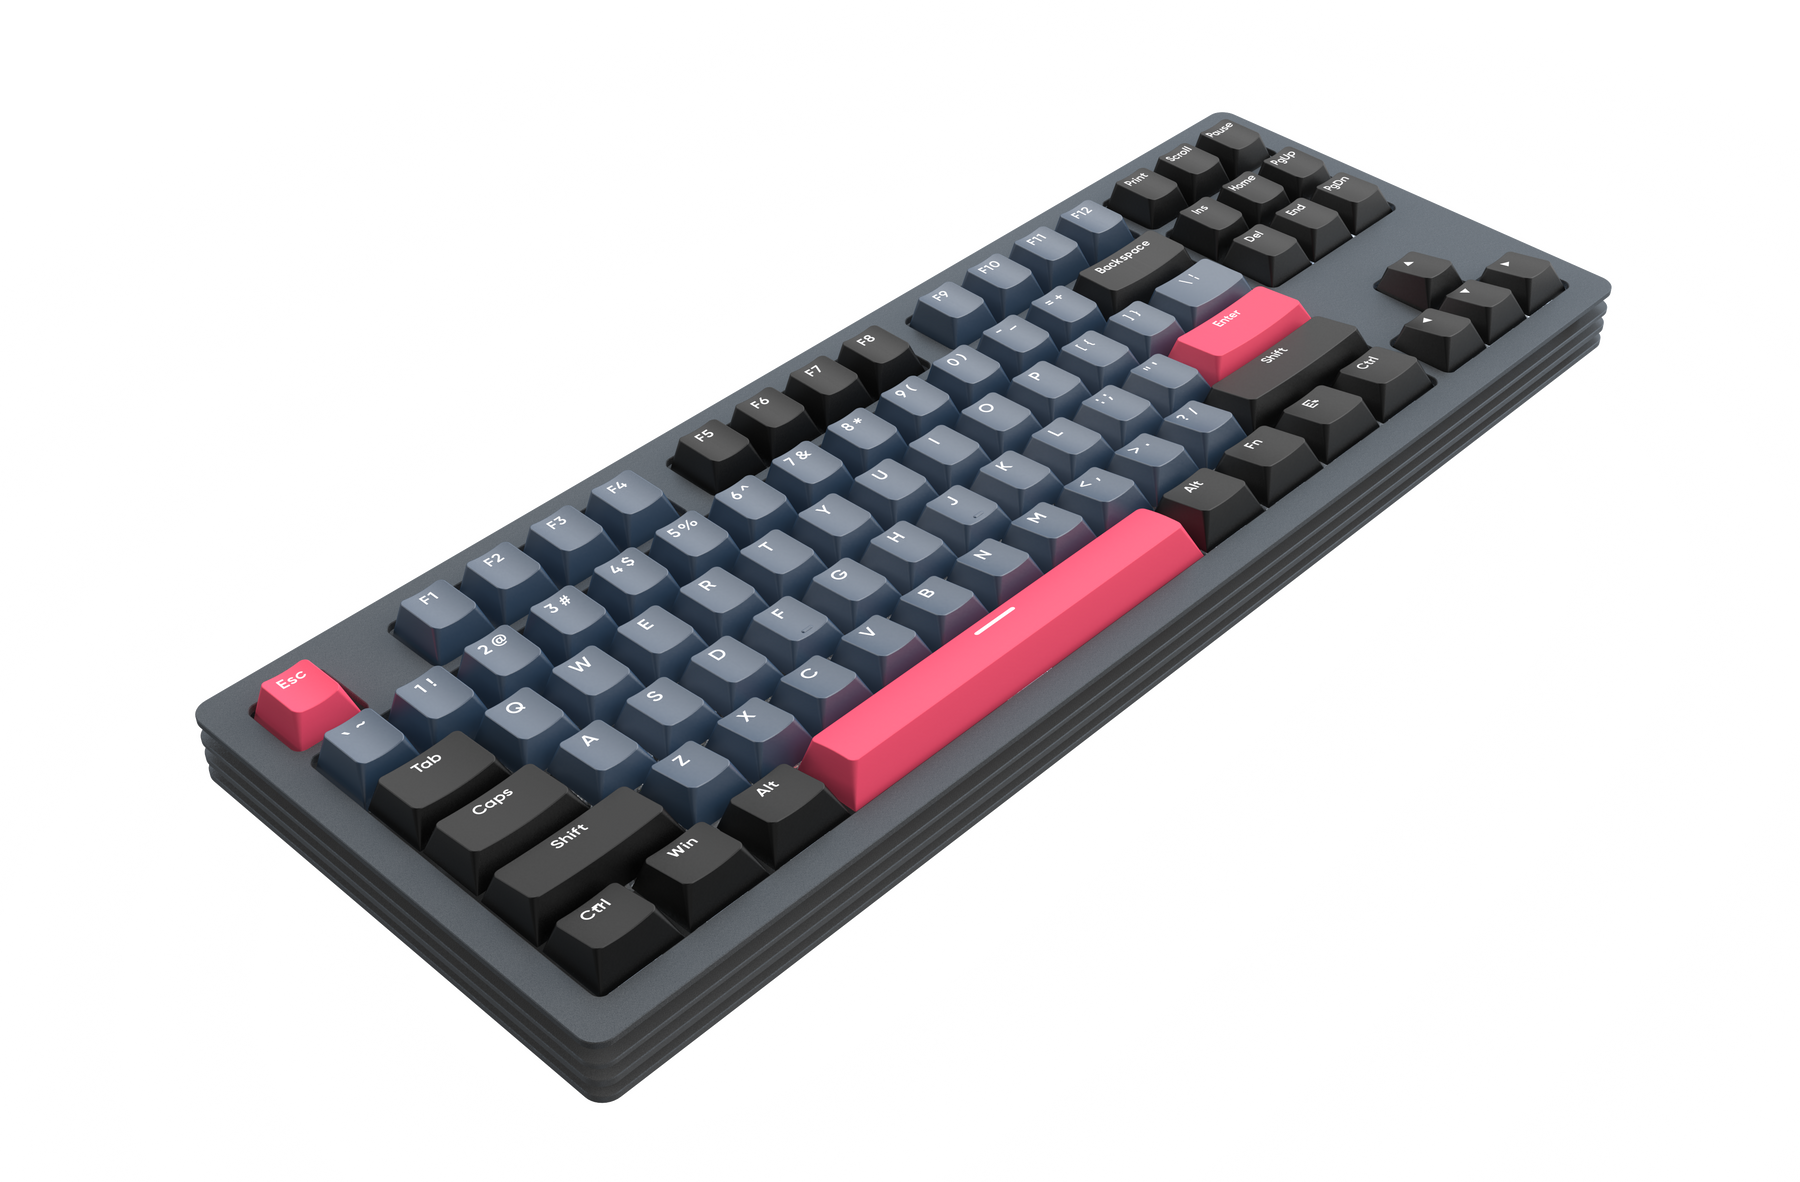 AJAZZ AKC087 Mechanical Keyboard, Tri-mode Connection, BT5.0 Wireless Keyboard, Multi-layer Metal Base, Compact 87 Keys Layout, TKL, Retro Tricolor, Hotswappable Rechargeable RGB Keyboard, for Win/Mac